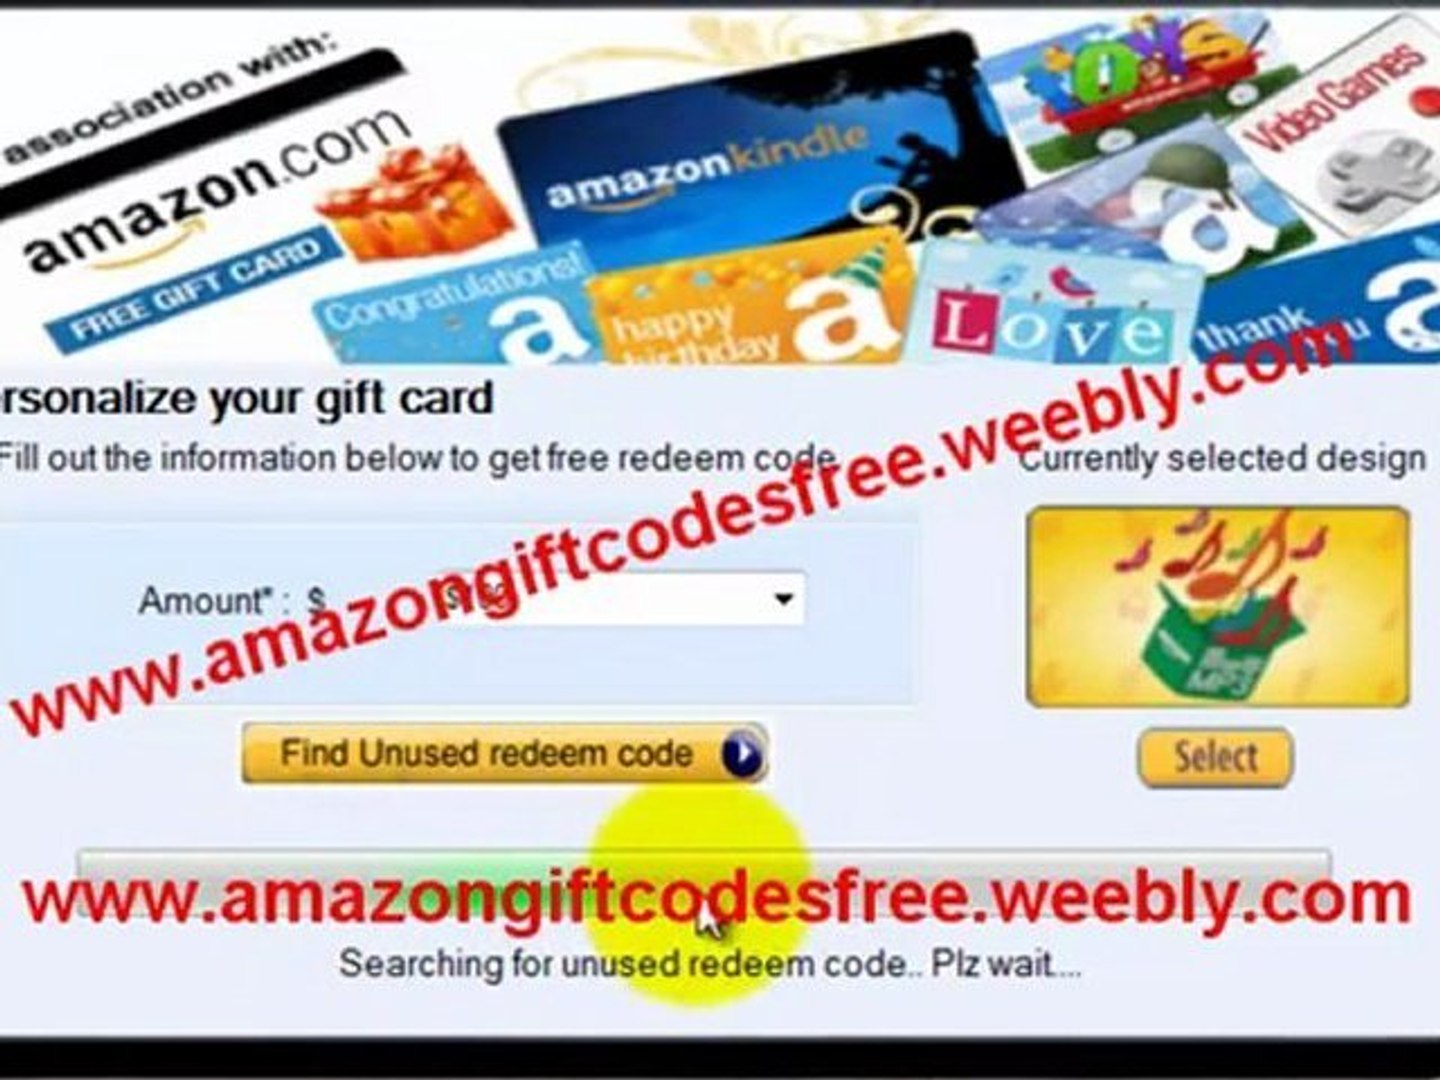 Easy Get Free Amazon Gift Cards Generator Free 50 Amazon Gift Card Code 100 Amazon Gift Card Video Dailymotion